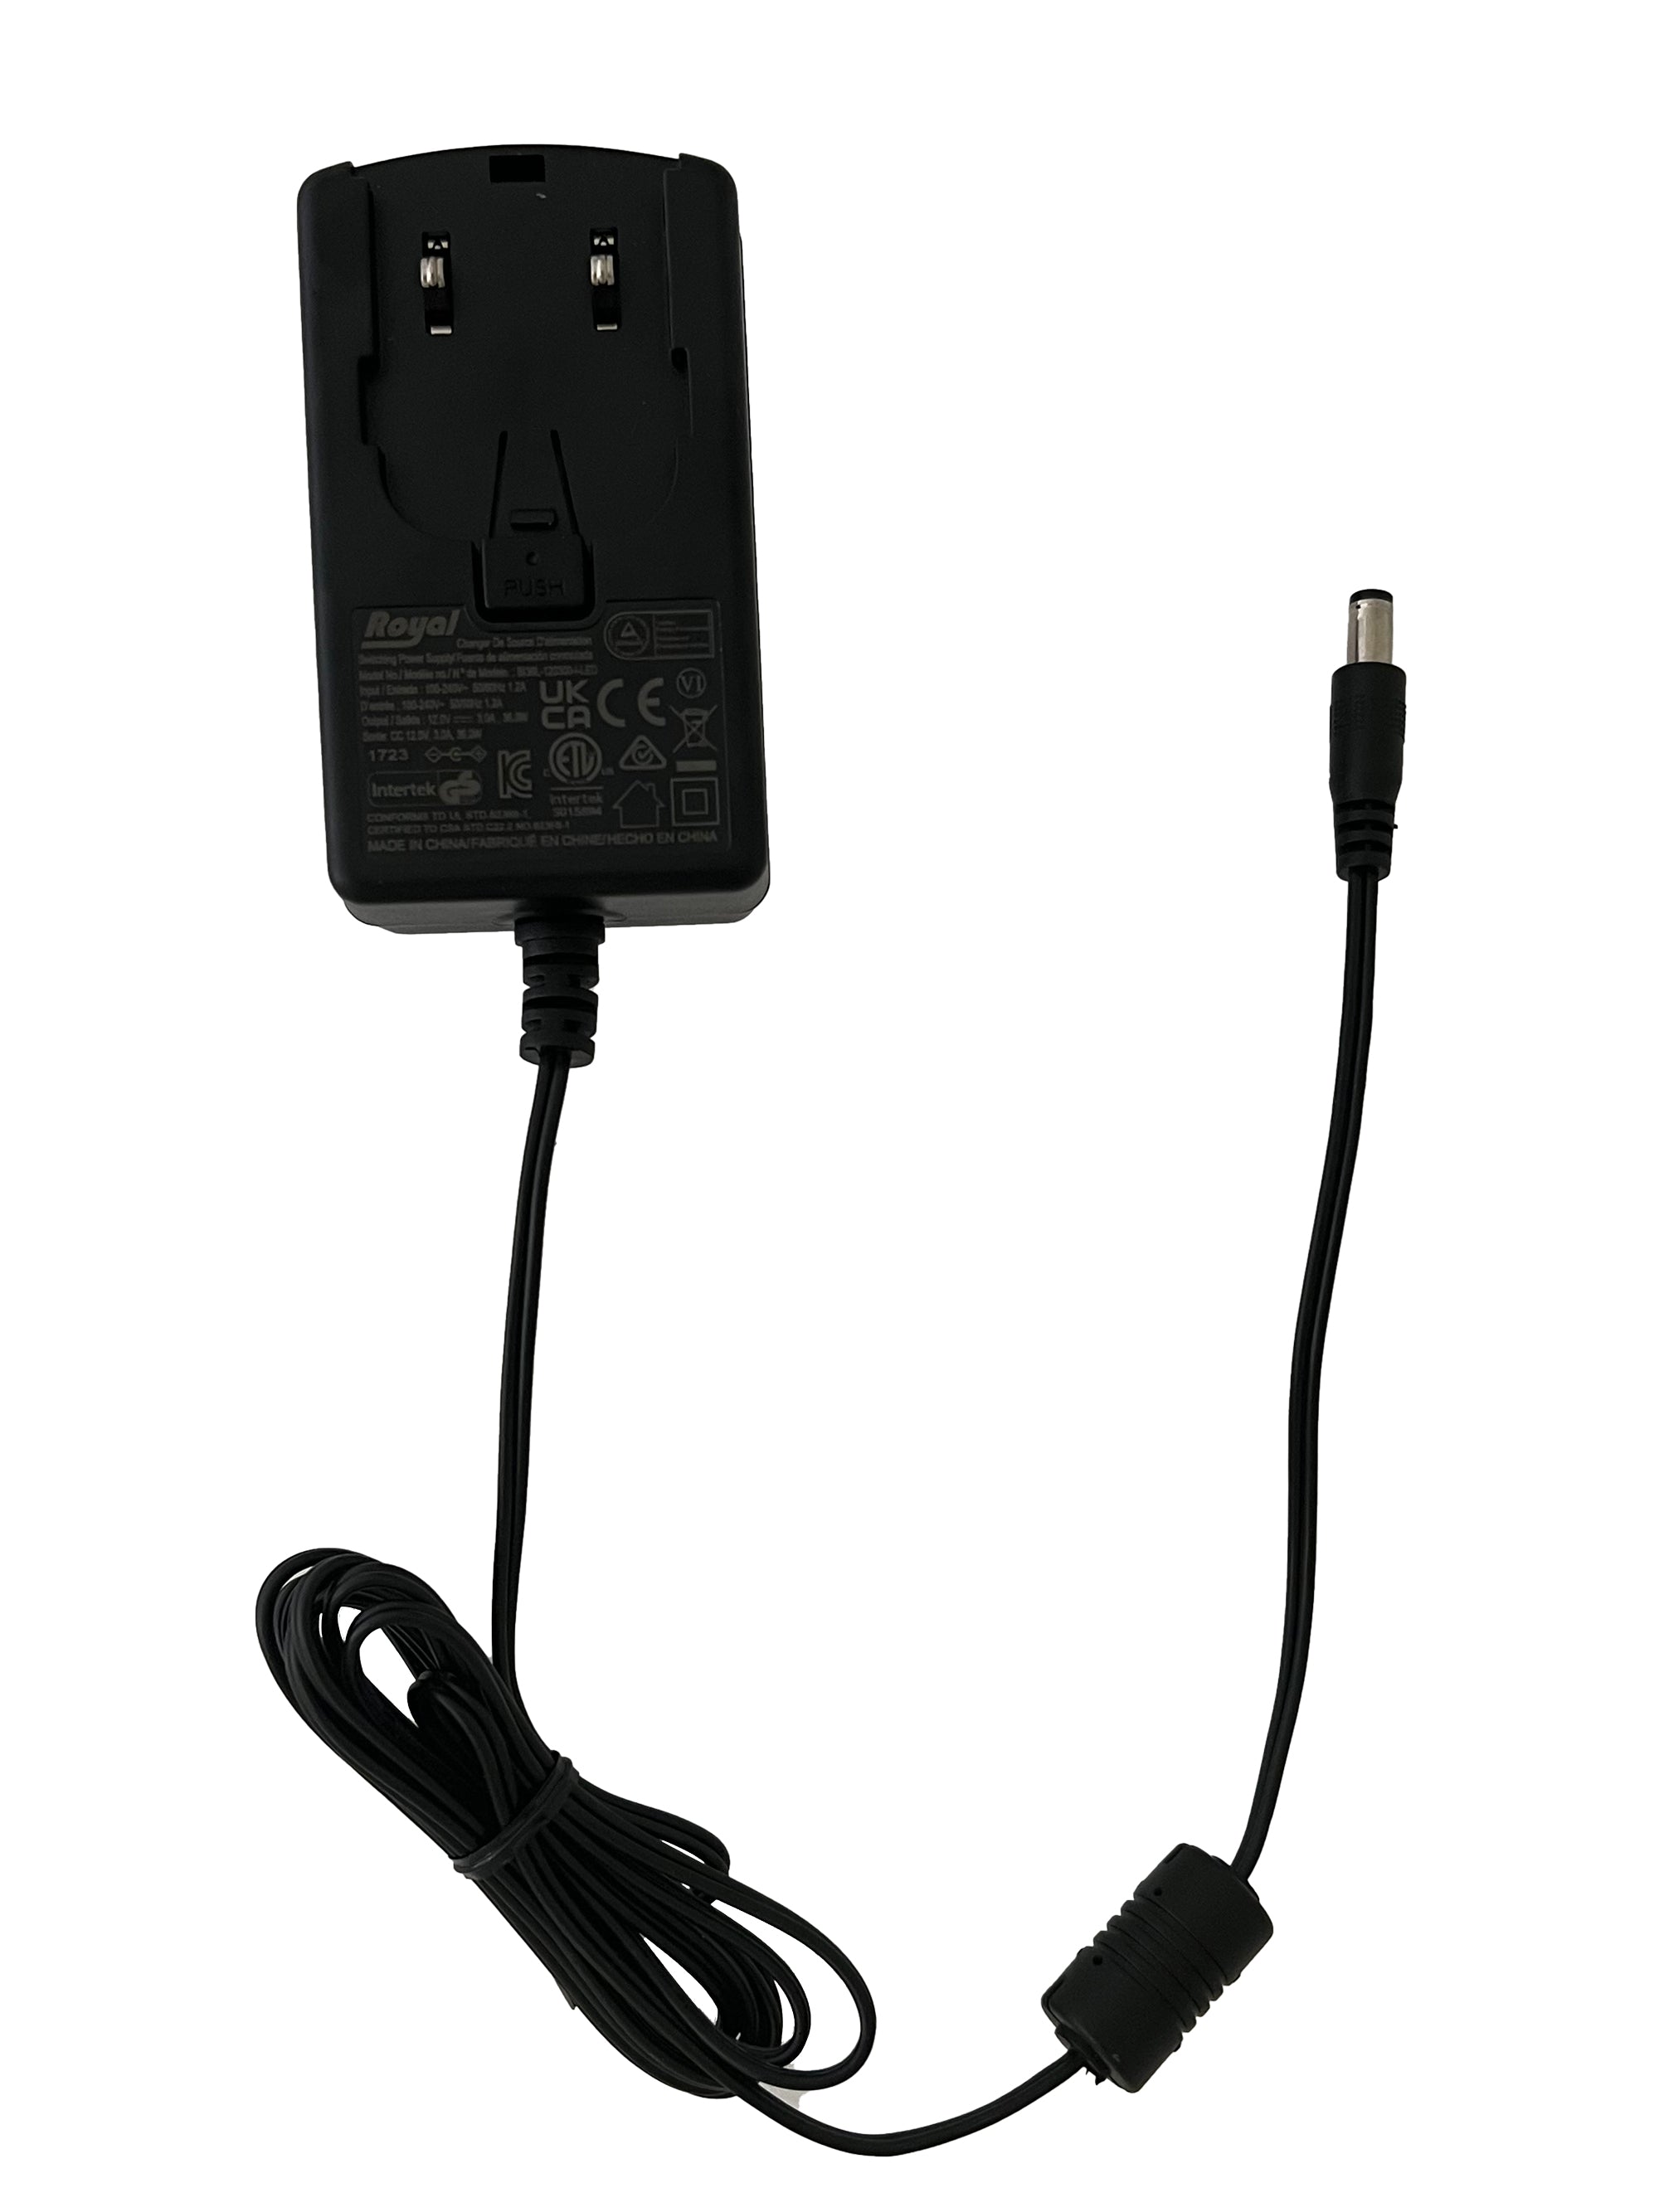 Power Supply, standard for all the Arcade1UP devices